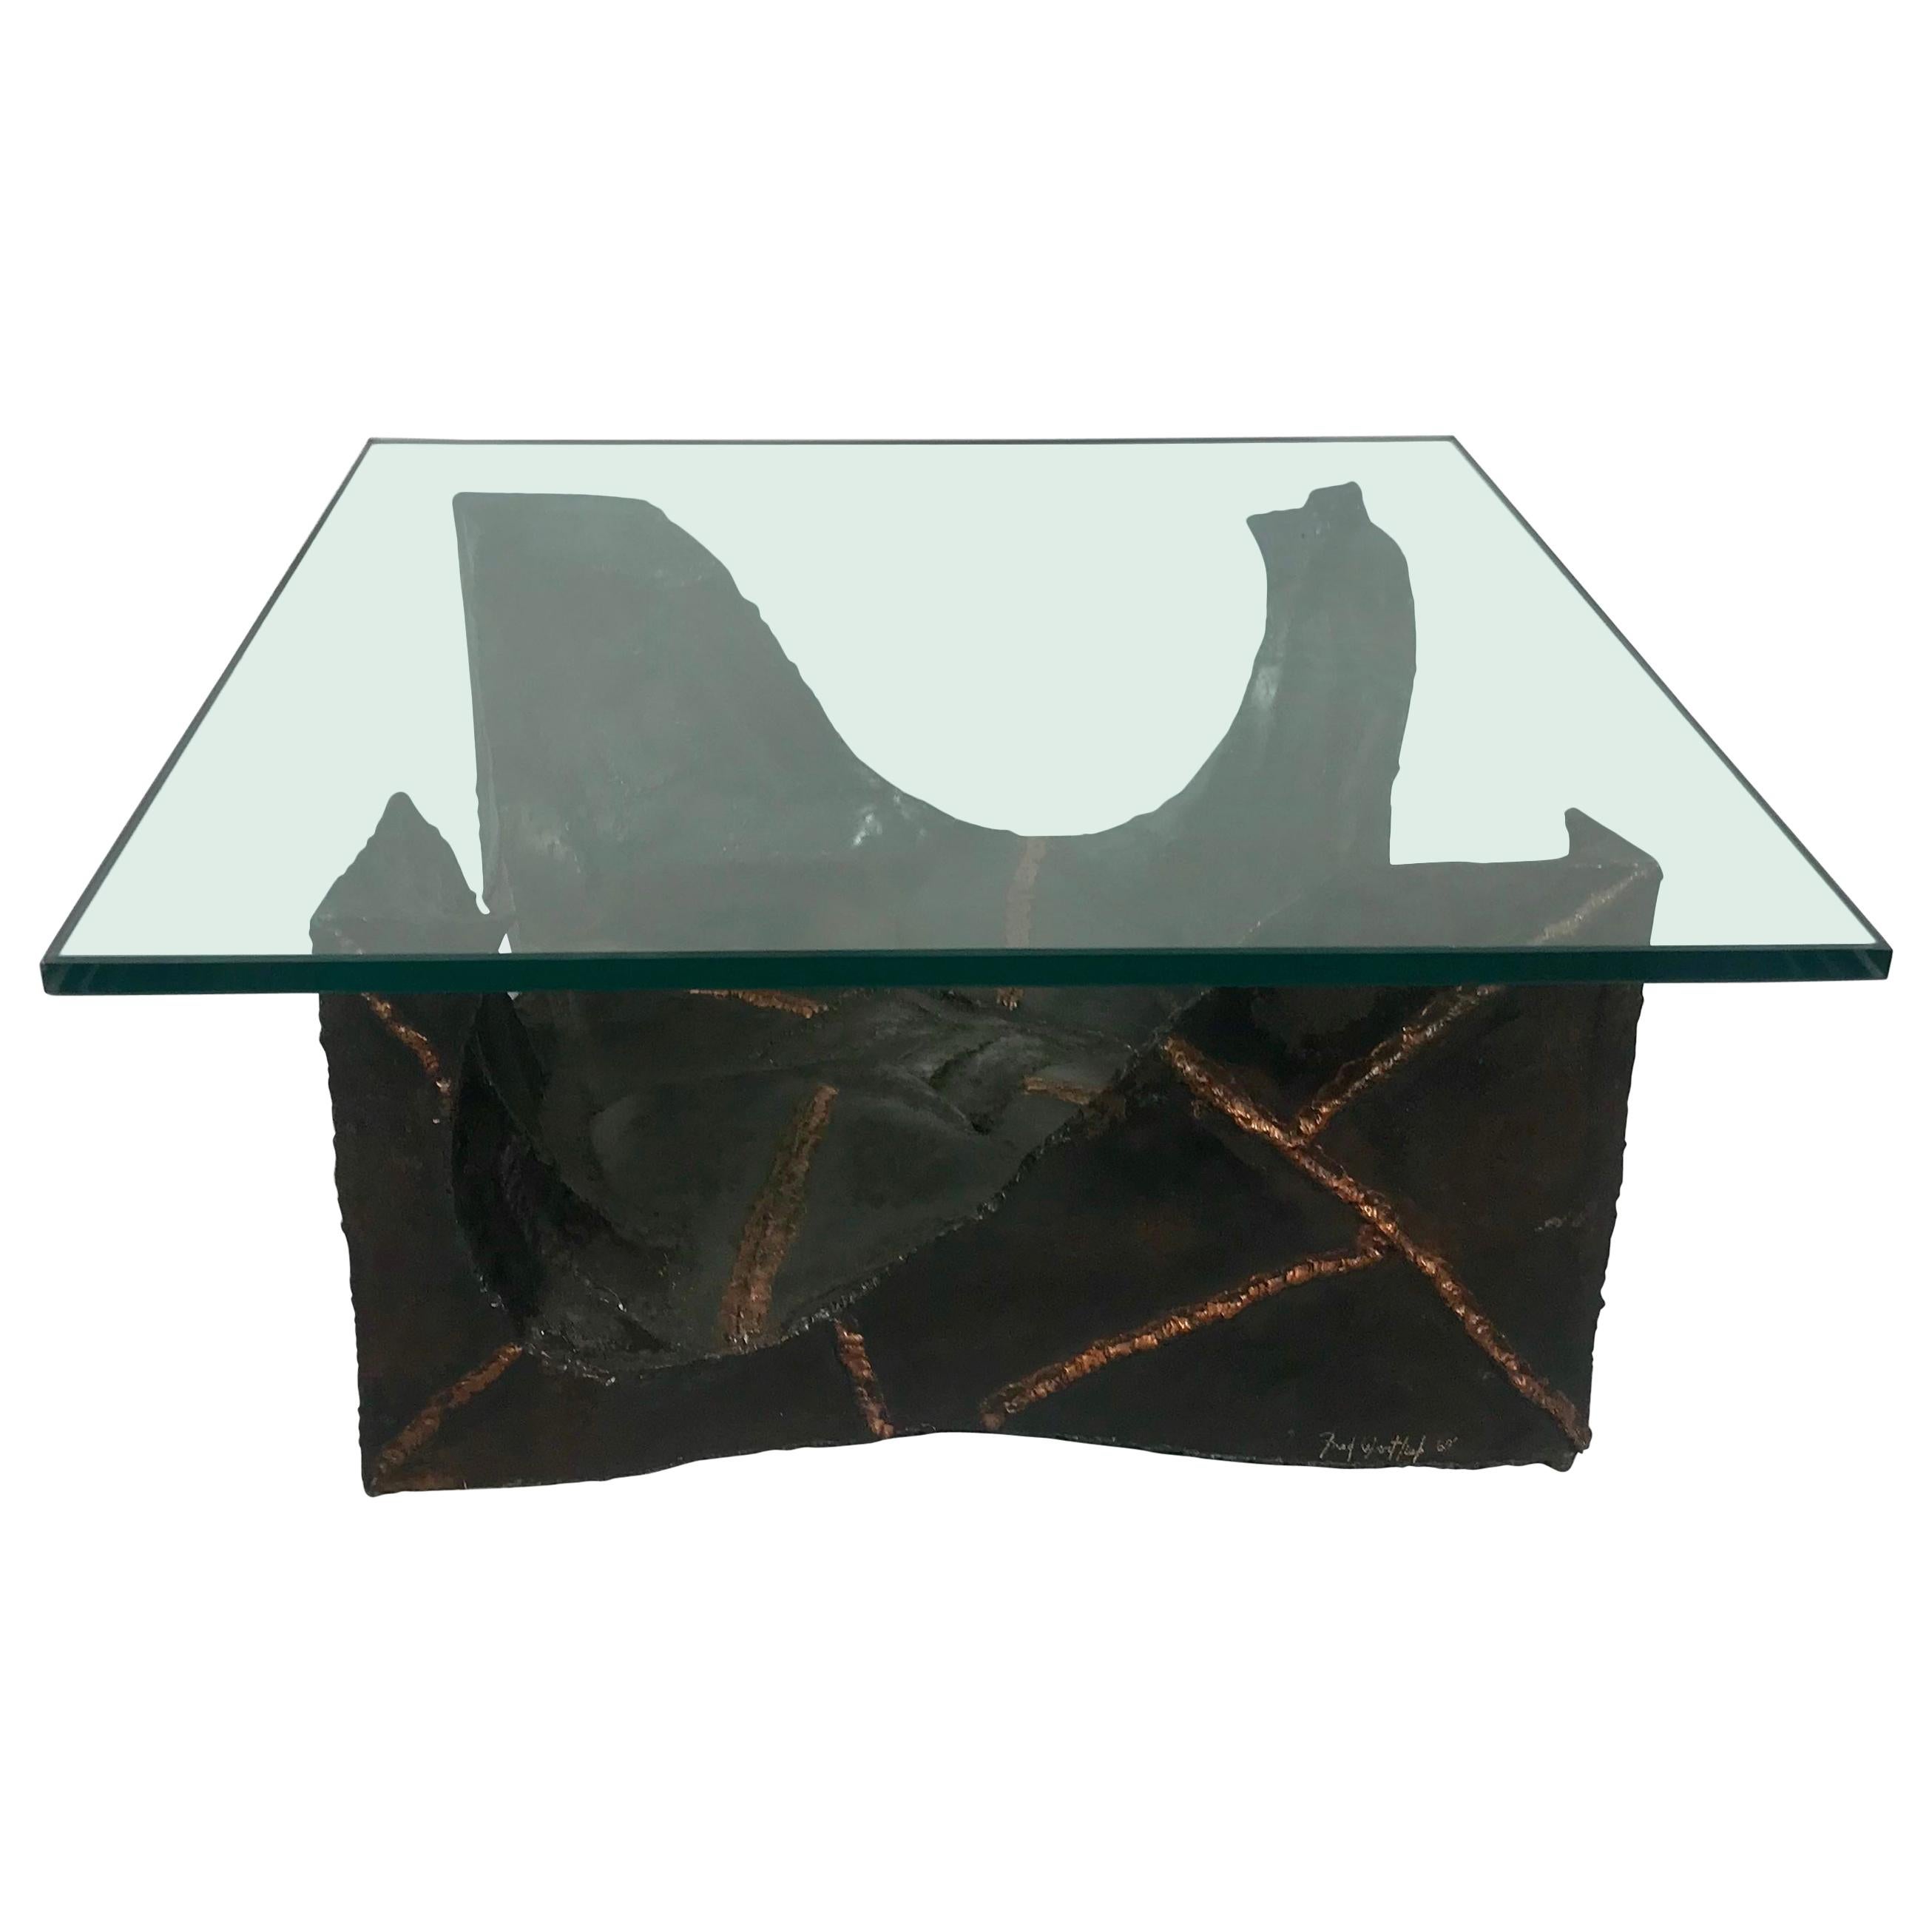 Brutalist Glass and Welded Metal Cocktail or Coffee table by Fred Wertlieb, 1969